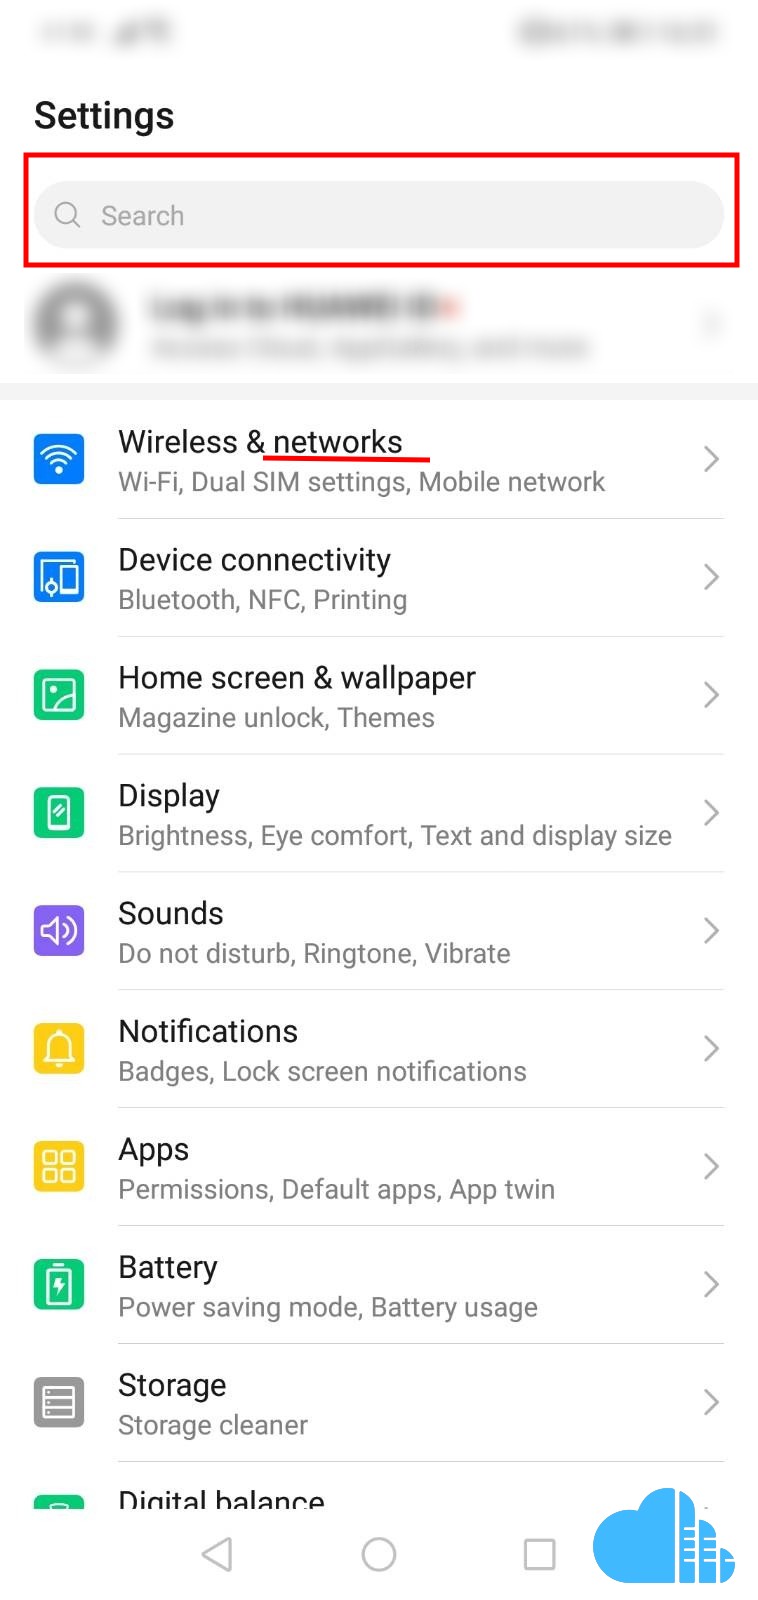 locate your mobile's settings